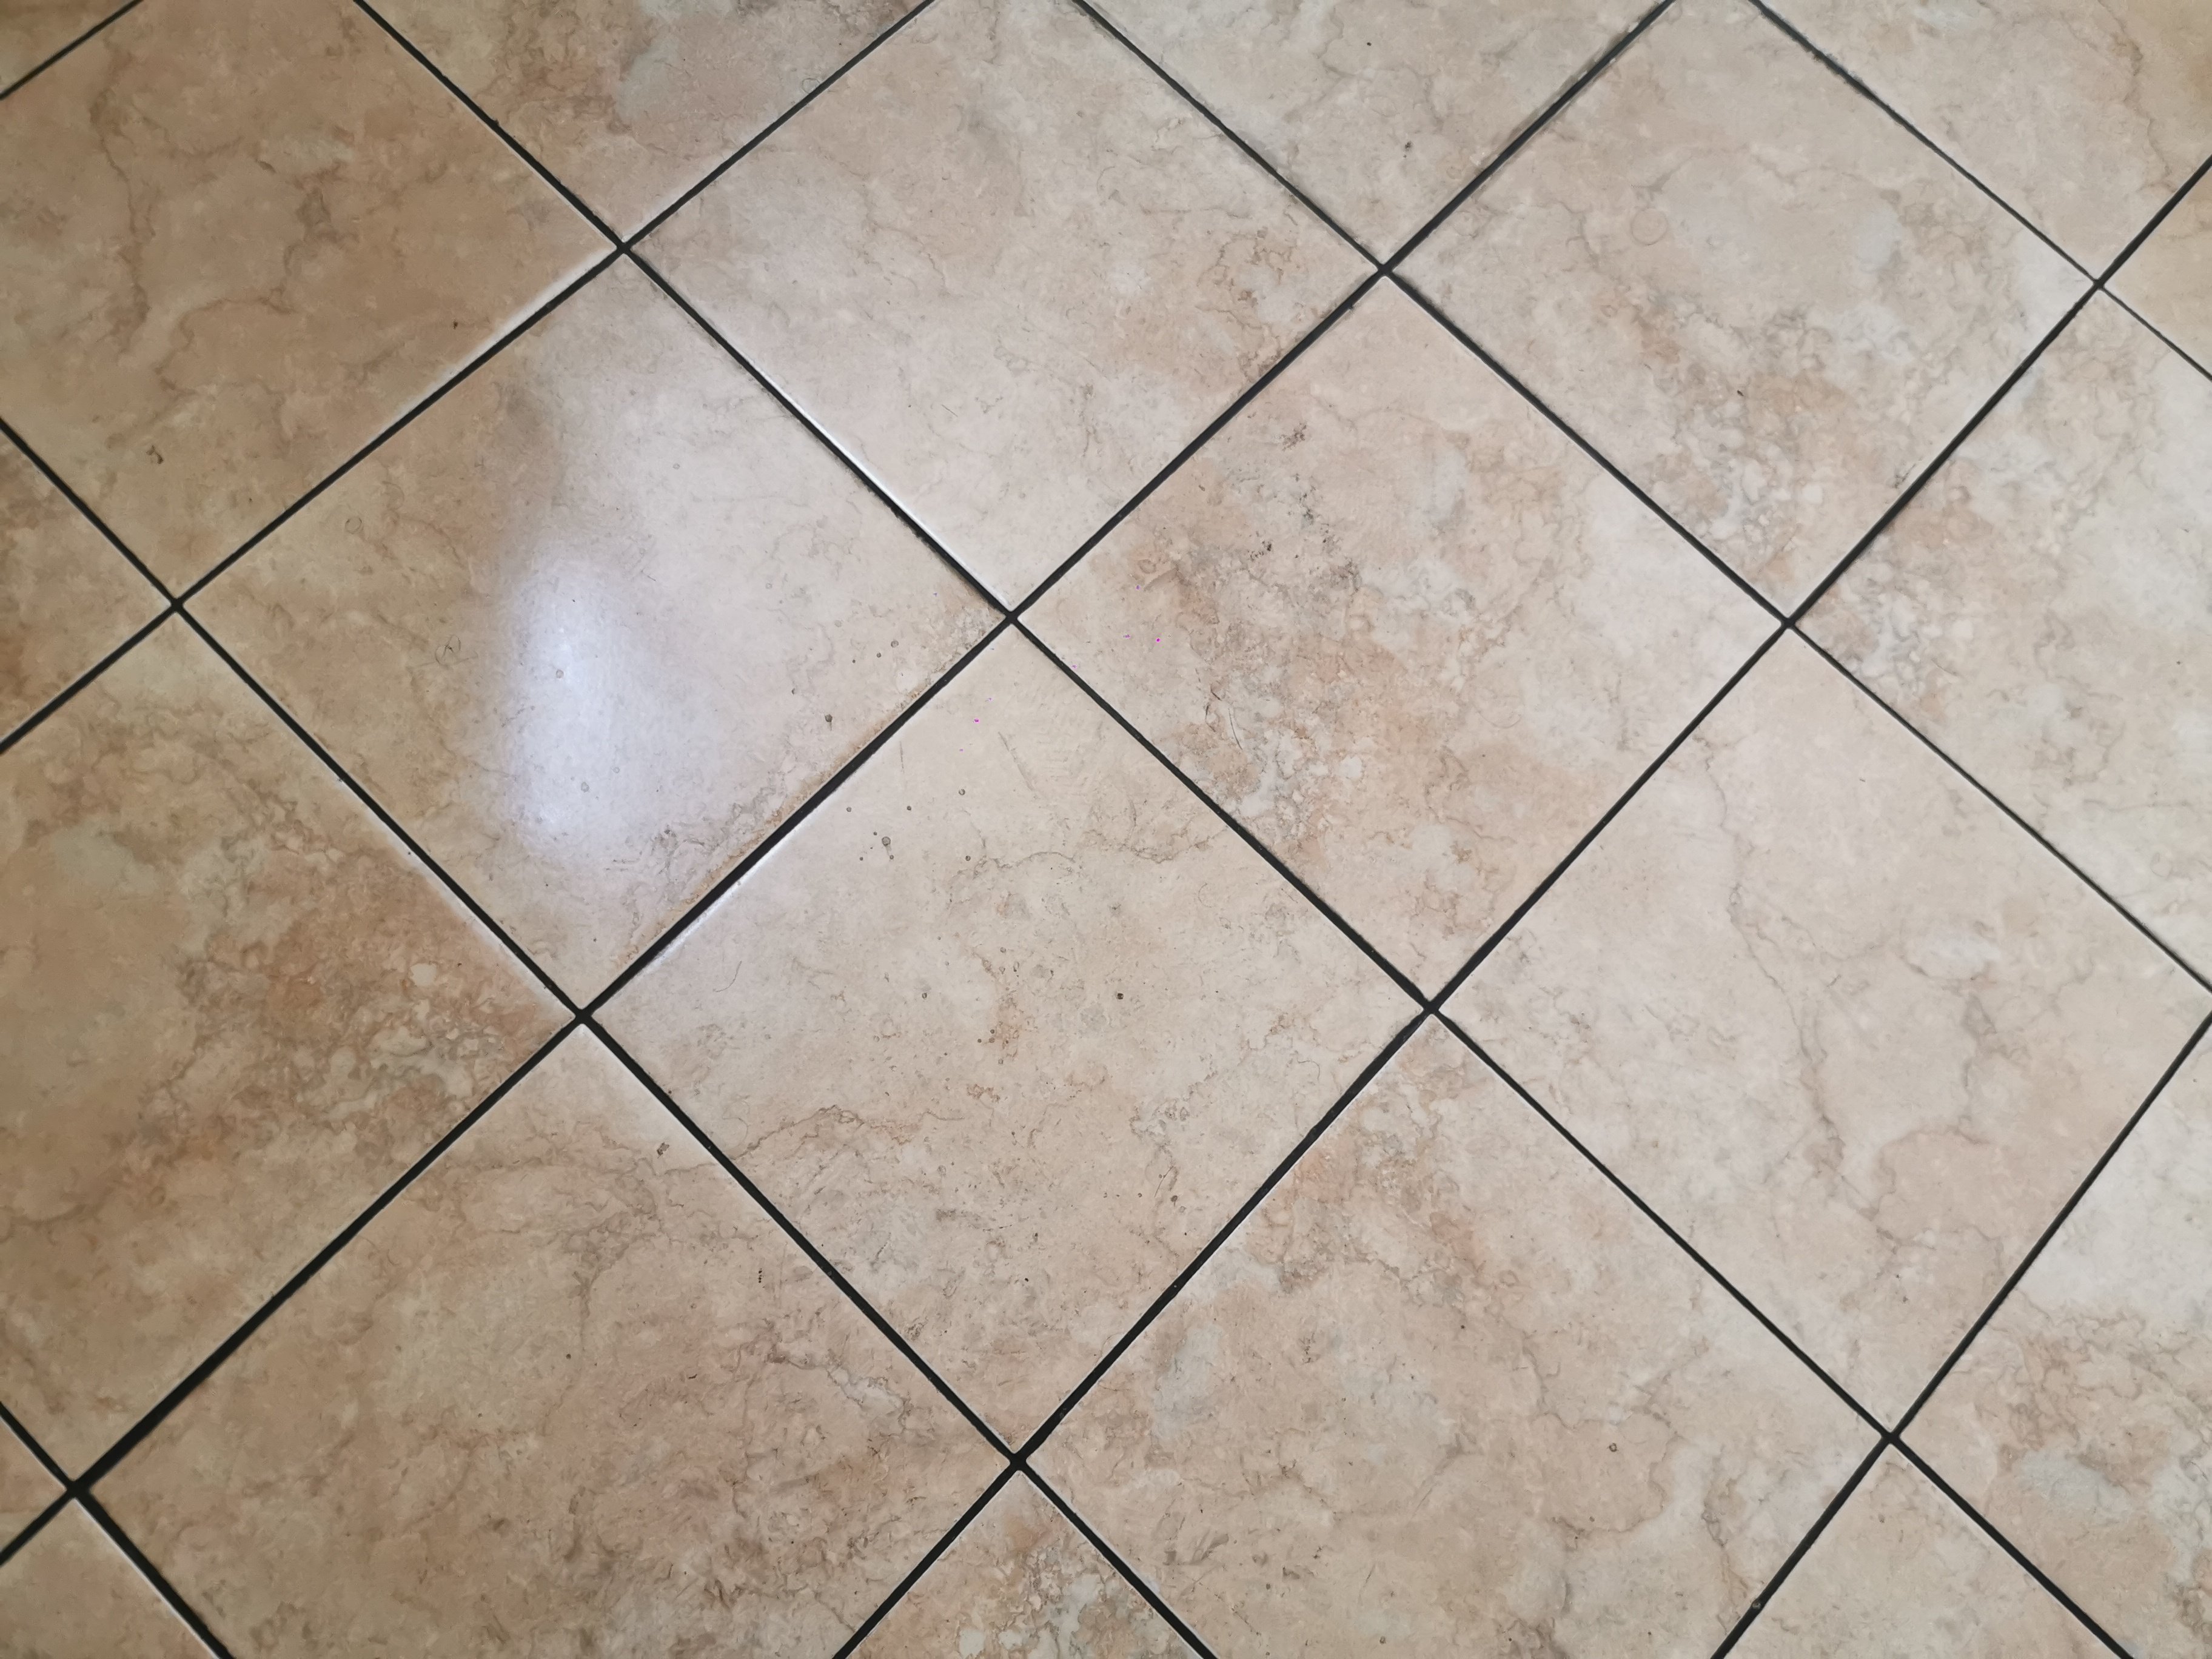 How To Identify Different Types Of Tile And Stone Flooring